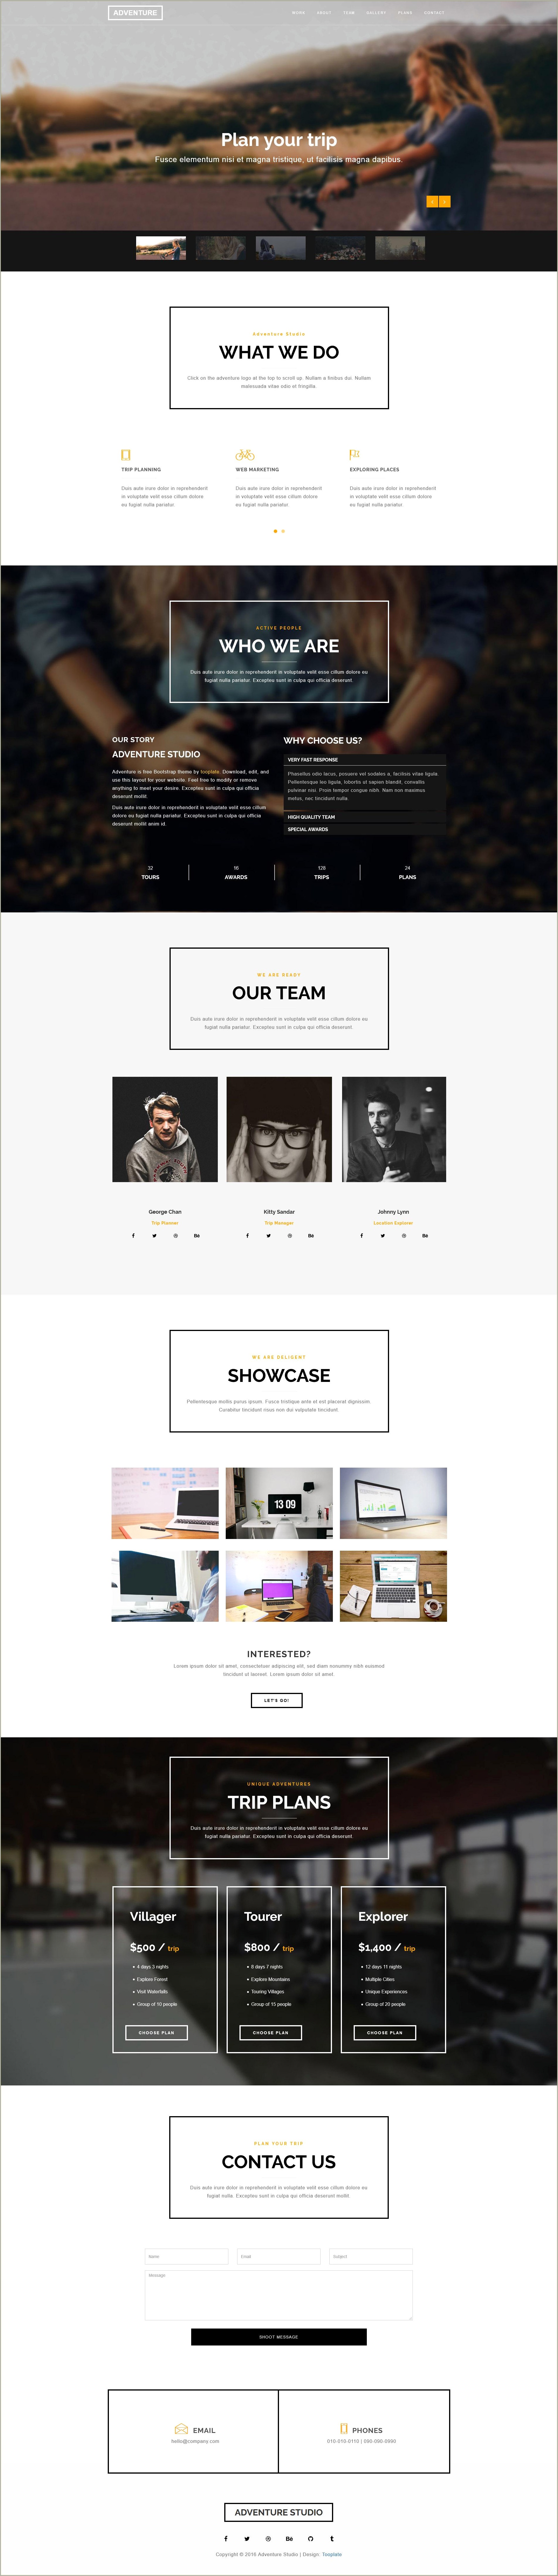 Html Css Templates With Slider Free Download